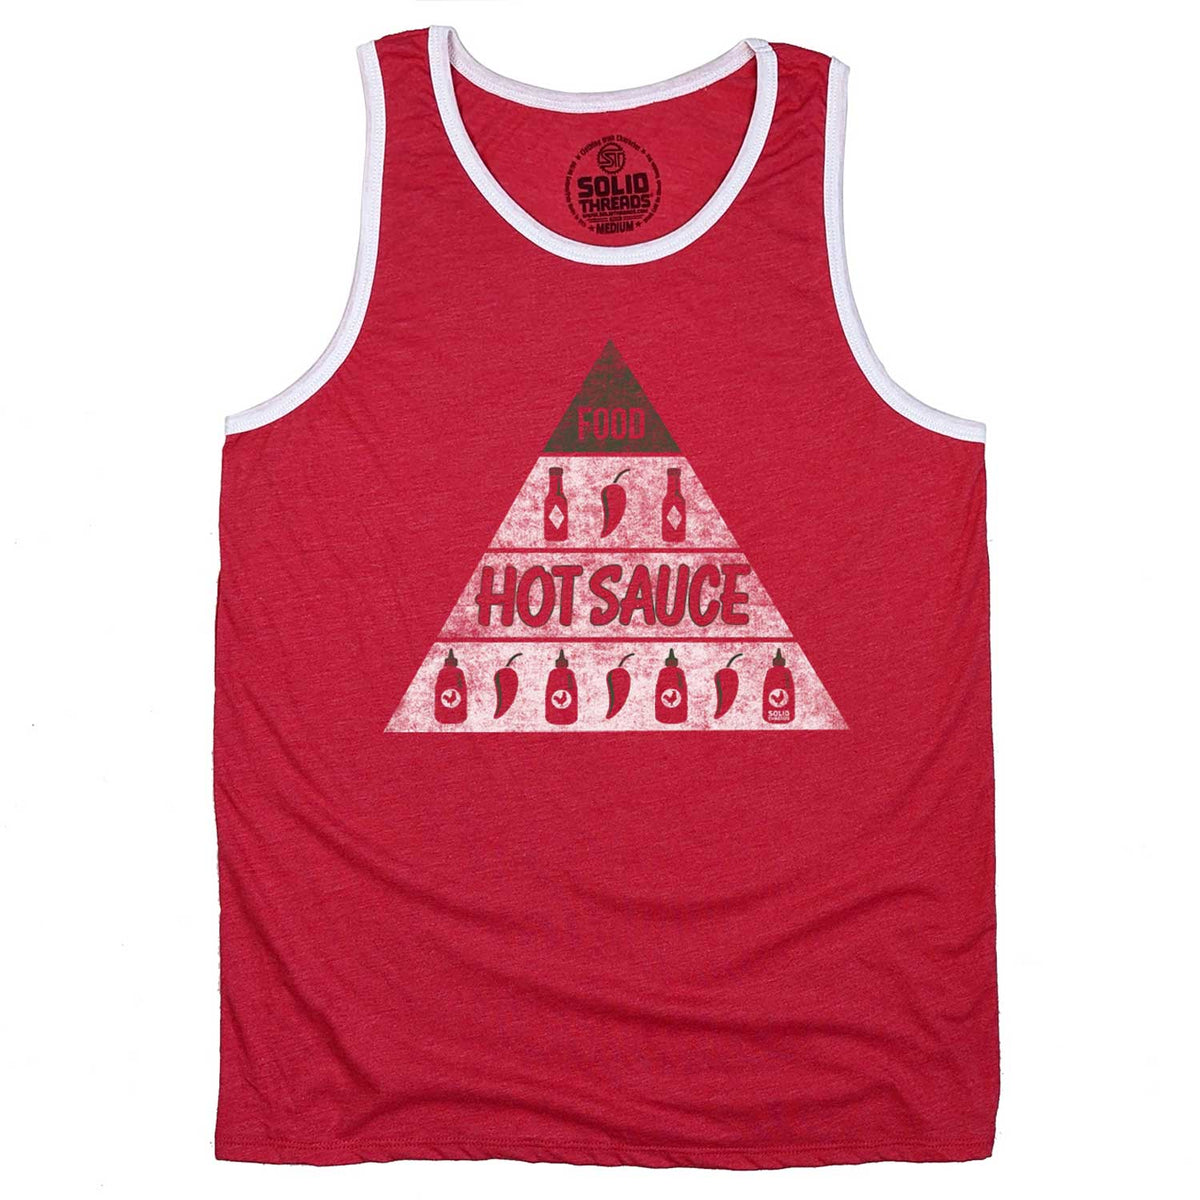 Men&#39;s Hot Sauce Vintage Graphic Tank Top | Funny Spicy Food Pyramid Sleeveless Shirt | Solid Threads